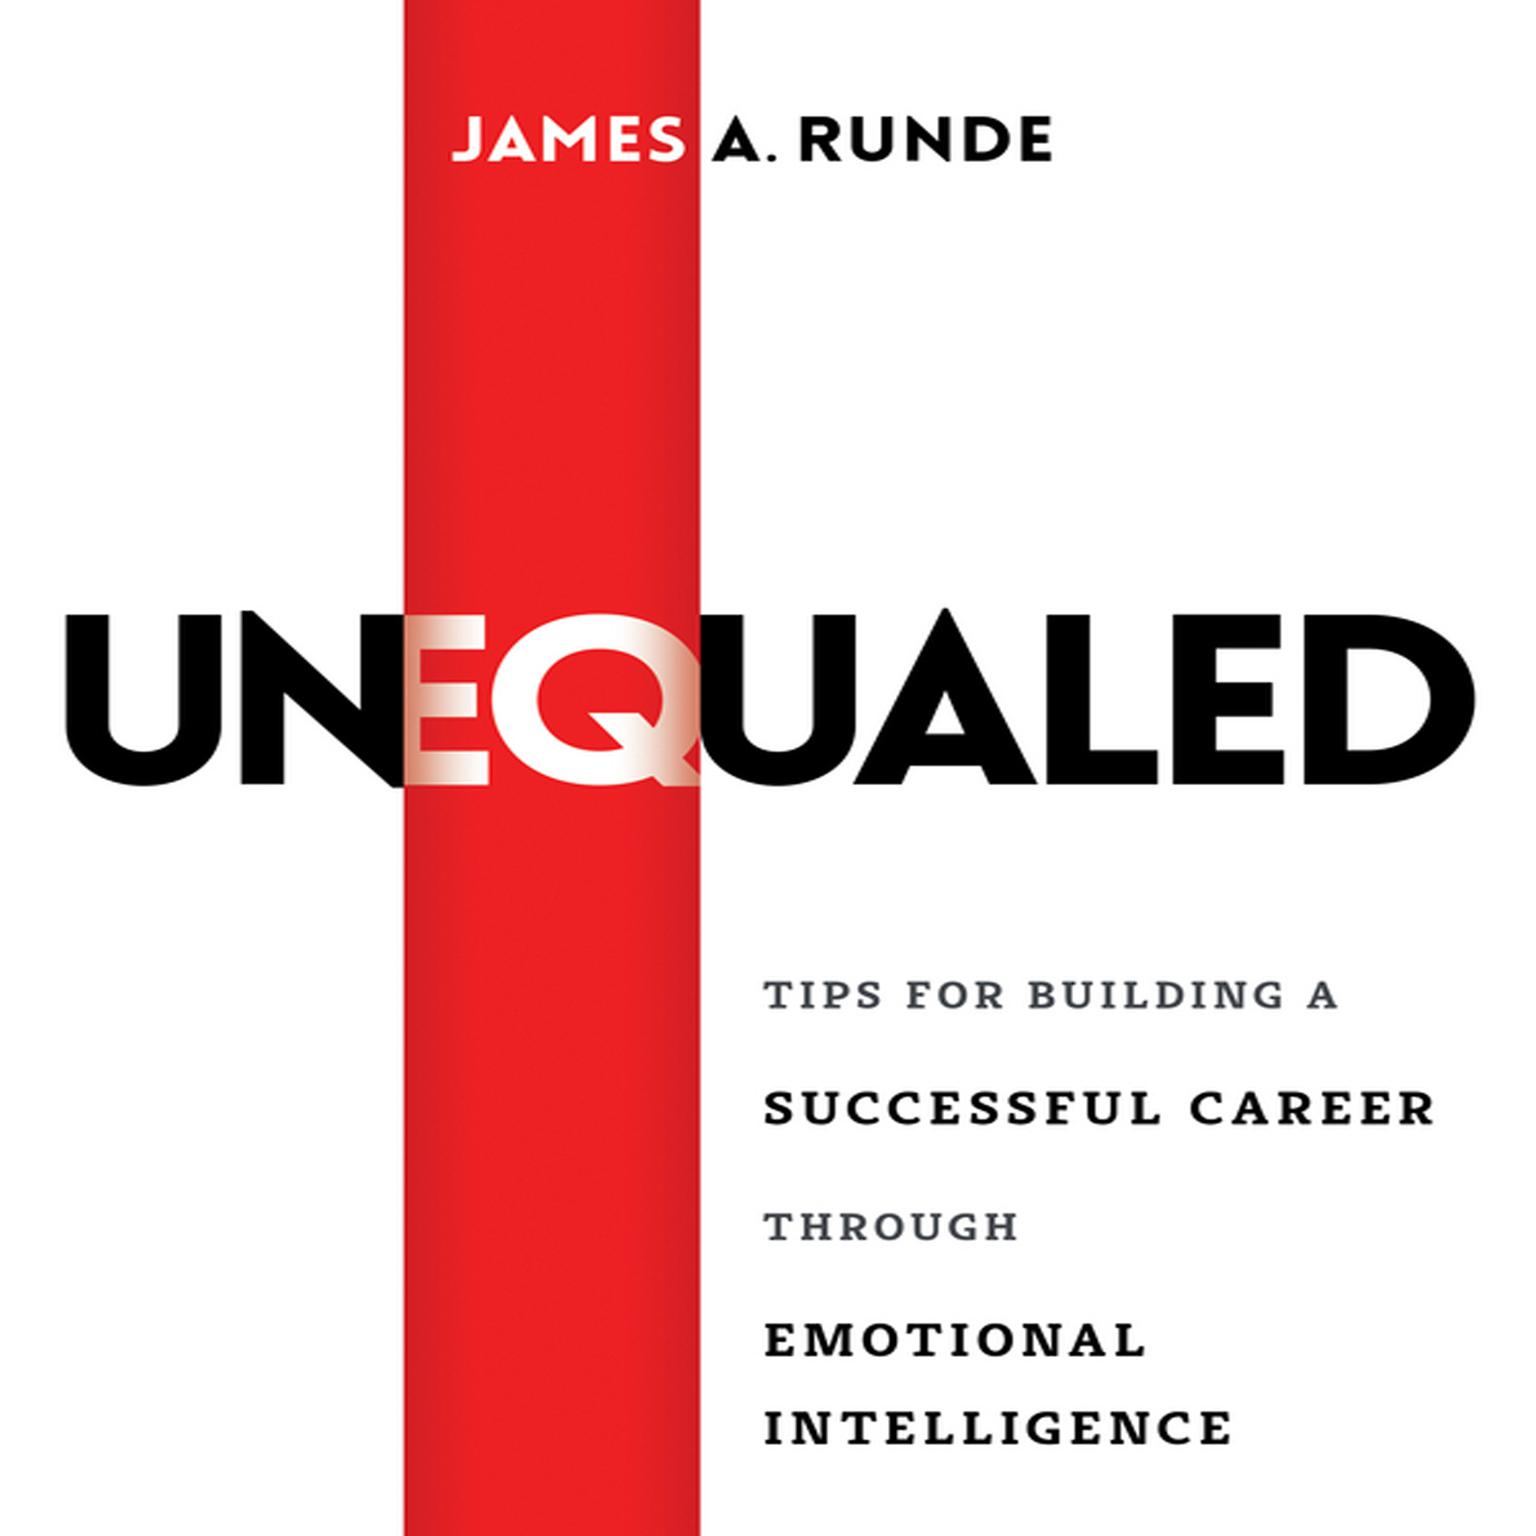 Unequaled: Tips for Building a Successful Career Through Emotional Intellignece Audiobook, by James A. Runde